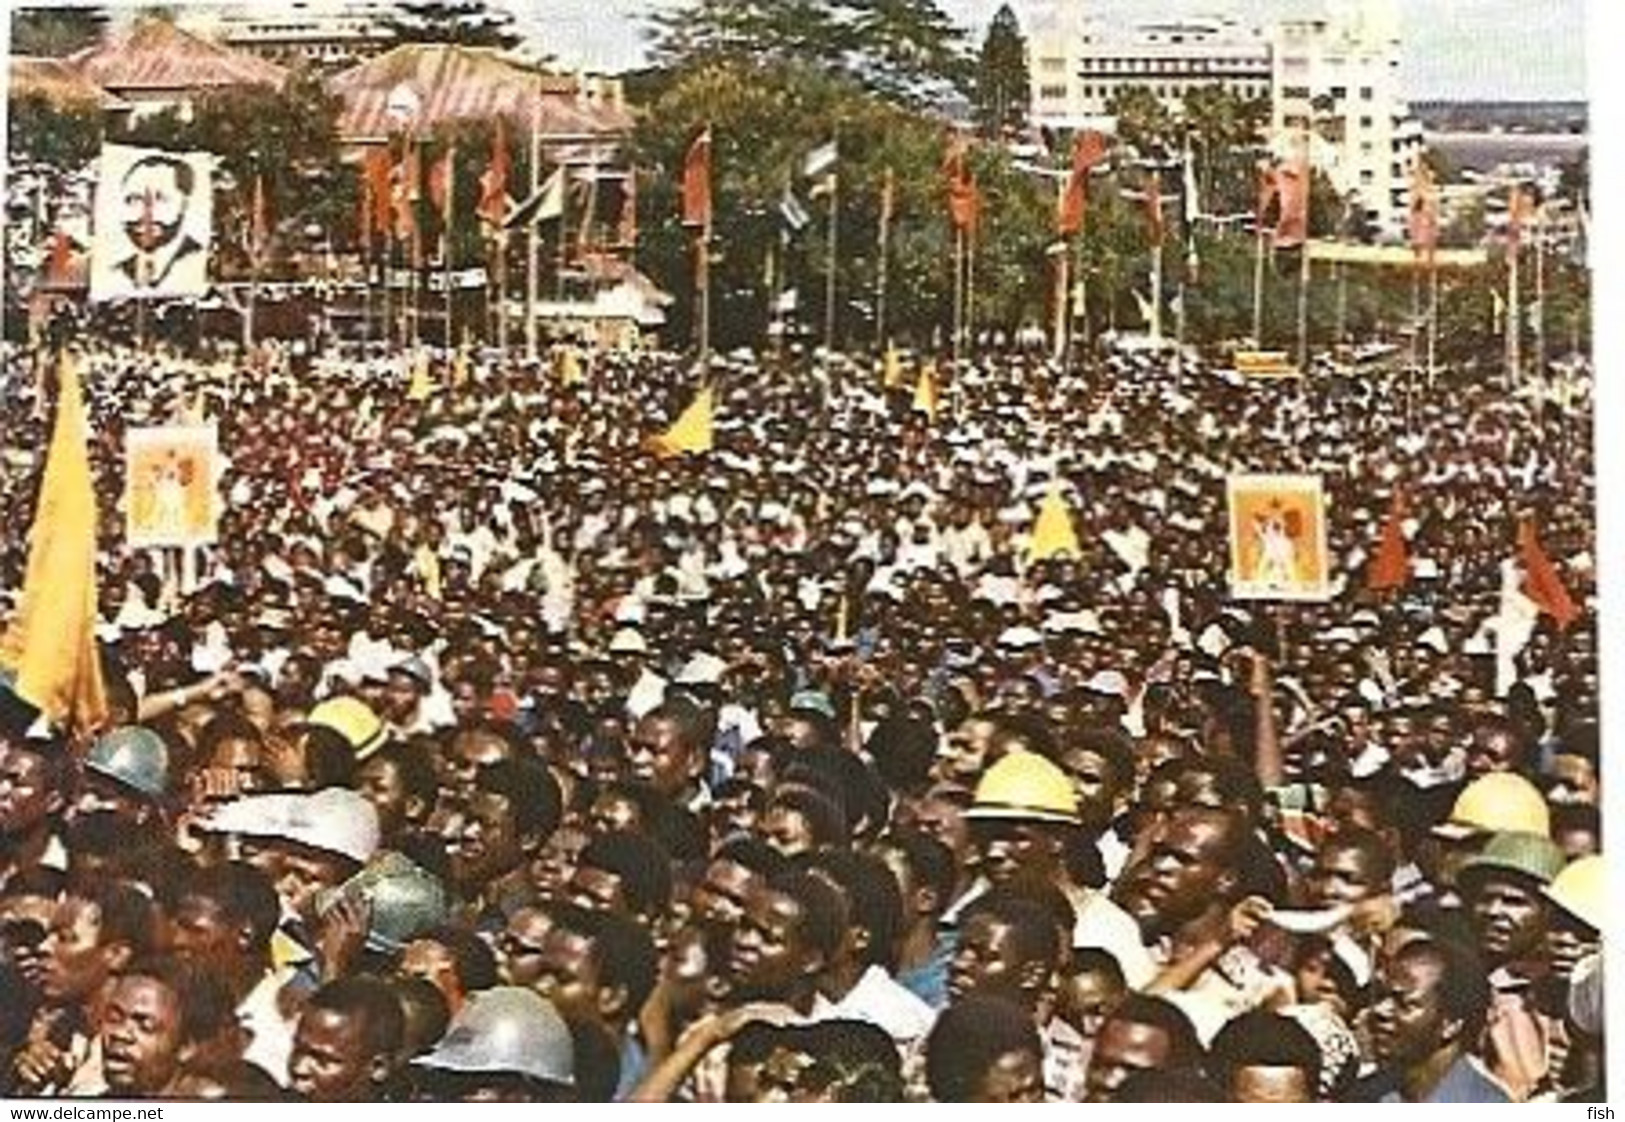 Mozambique ** & Postal, FRELIMO, People's Rally, May 1th, 1982 (98799) - Eventi